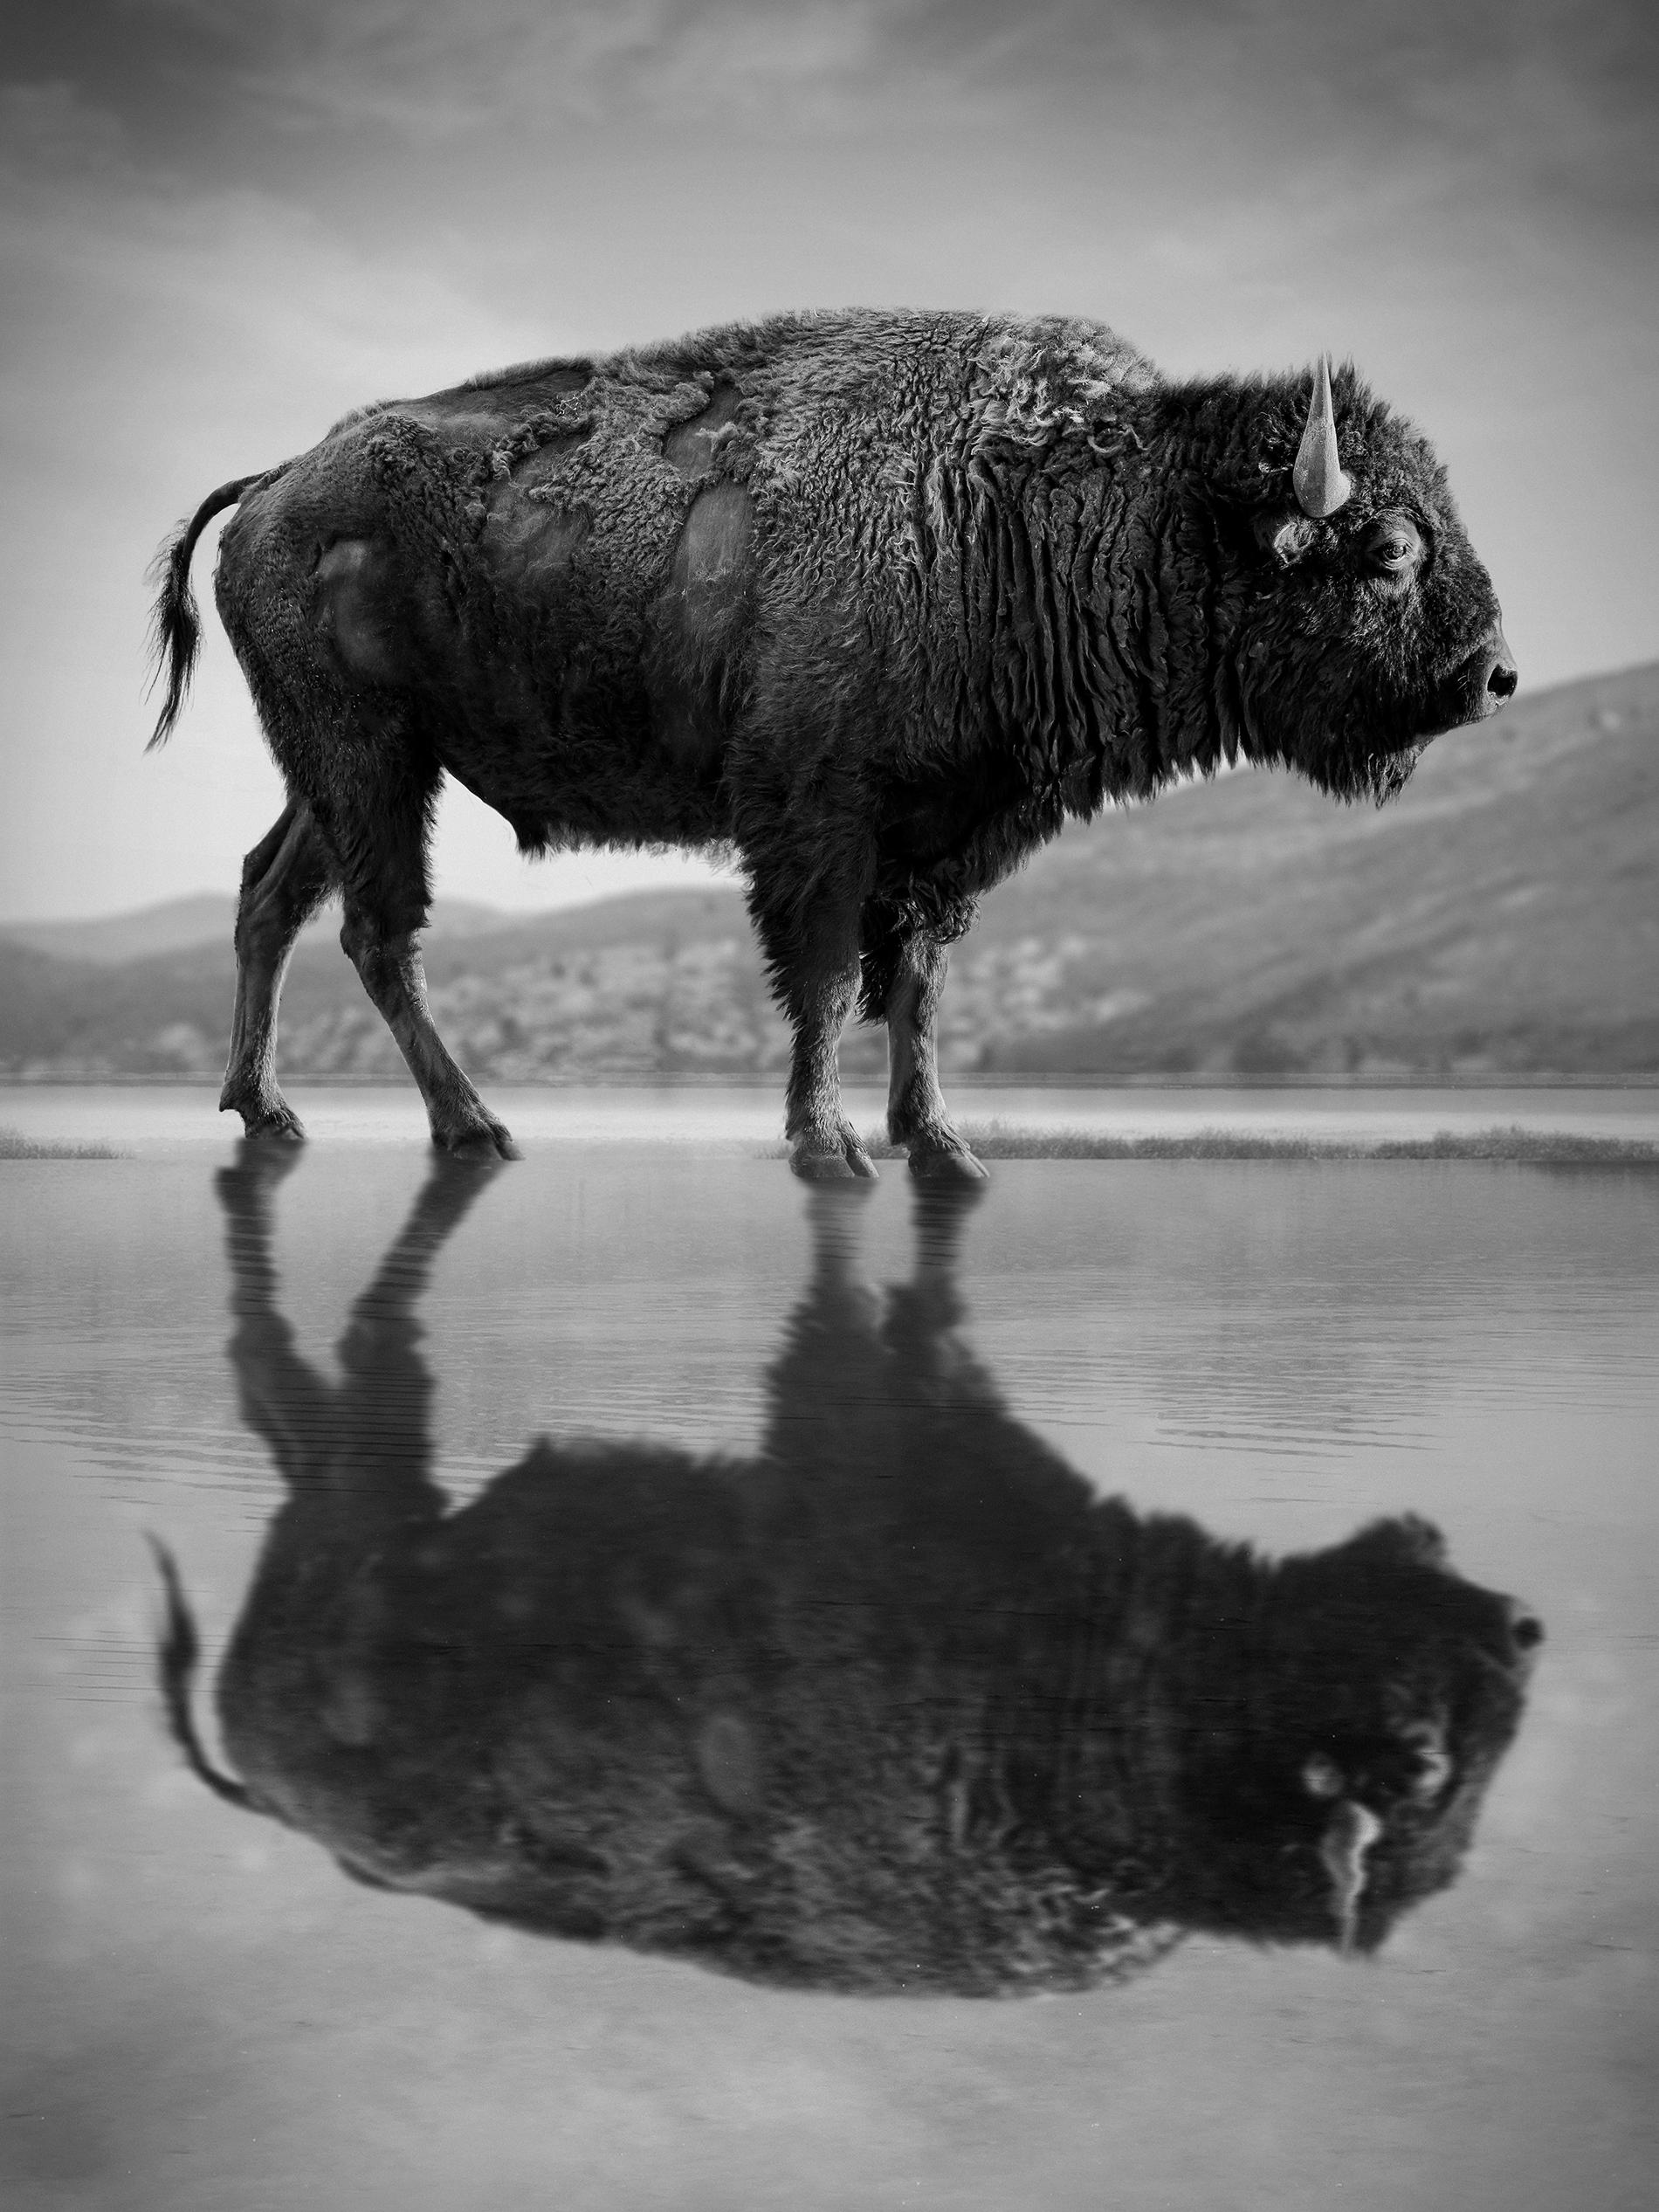 "Old World" 75x50 Black & White Photography Bison Buffalo Signed Photograph